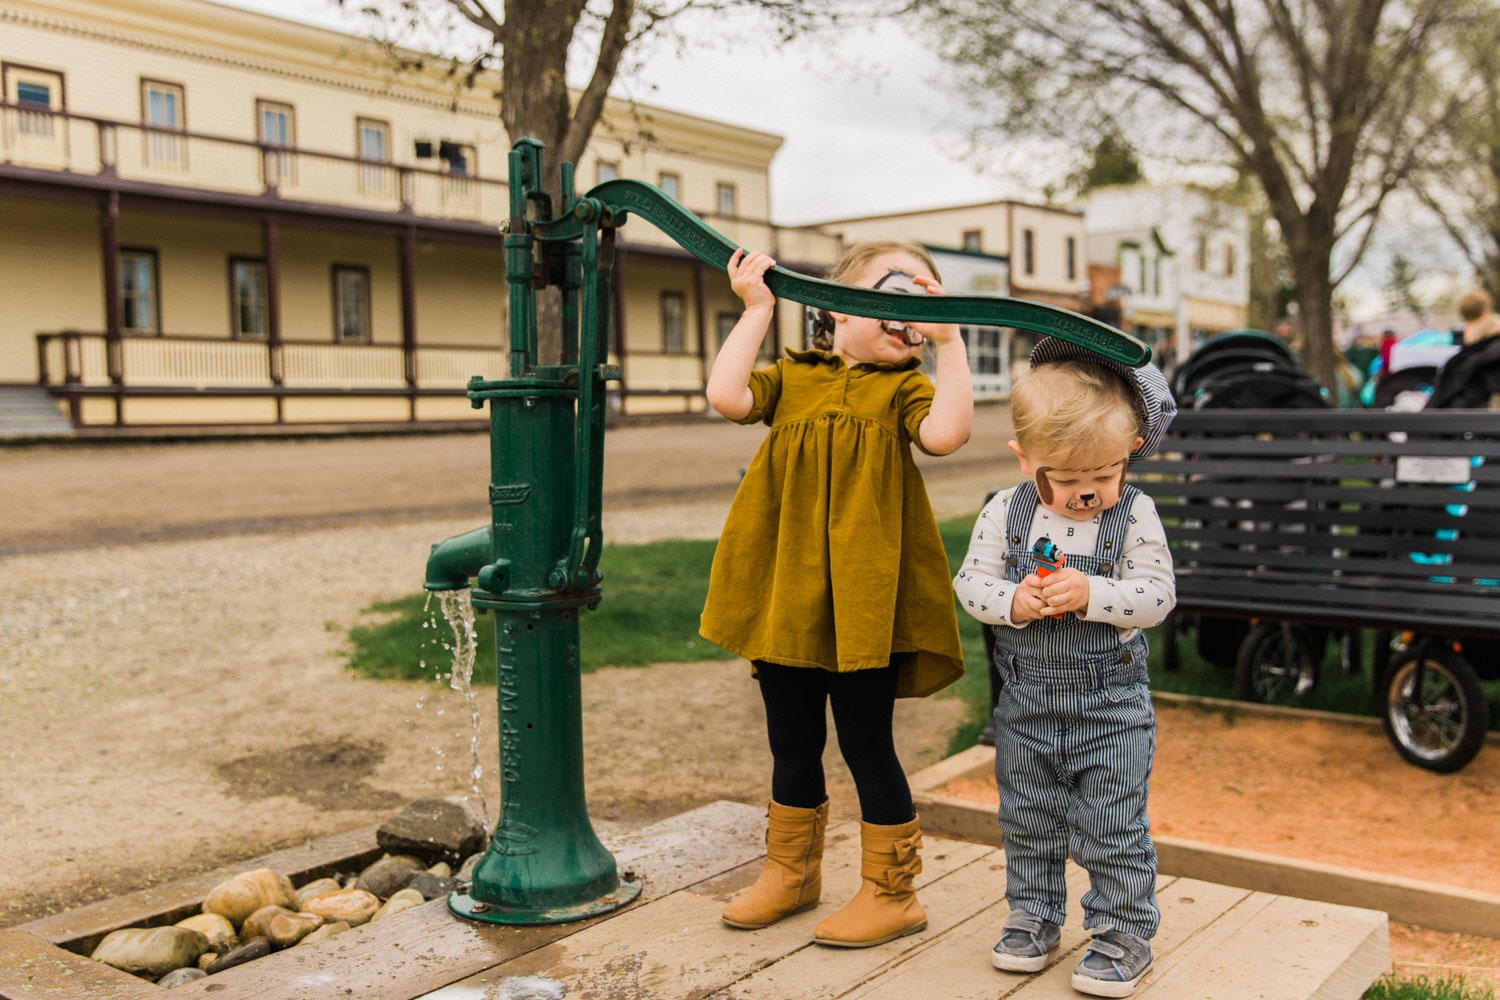 Day out with thomas, heritage park, calgary, Guenard photography, family activity